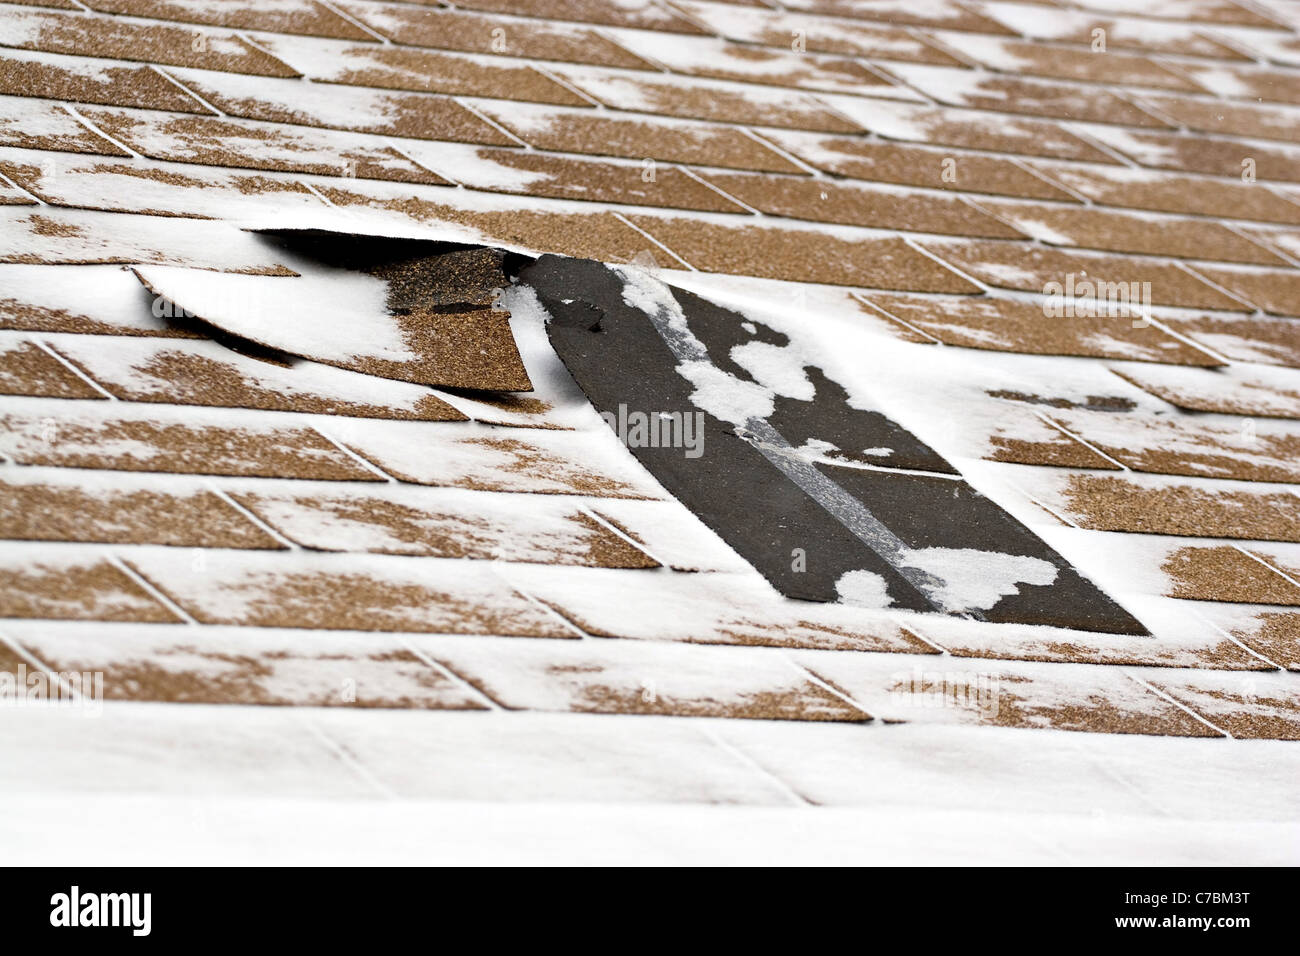 Damaged roof shingles blown off a home from a windy winter storm with strong winds. Stock Photo